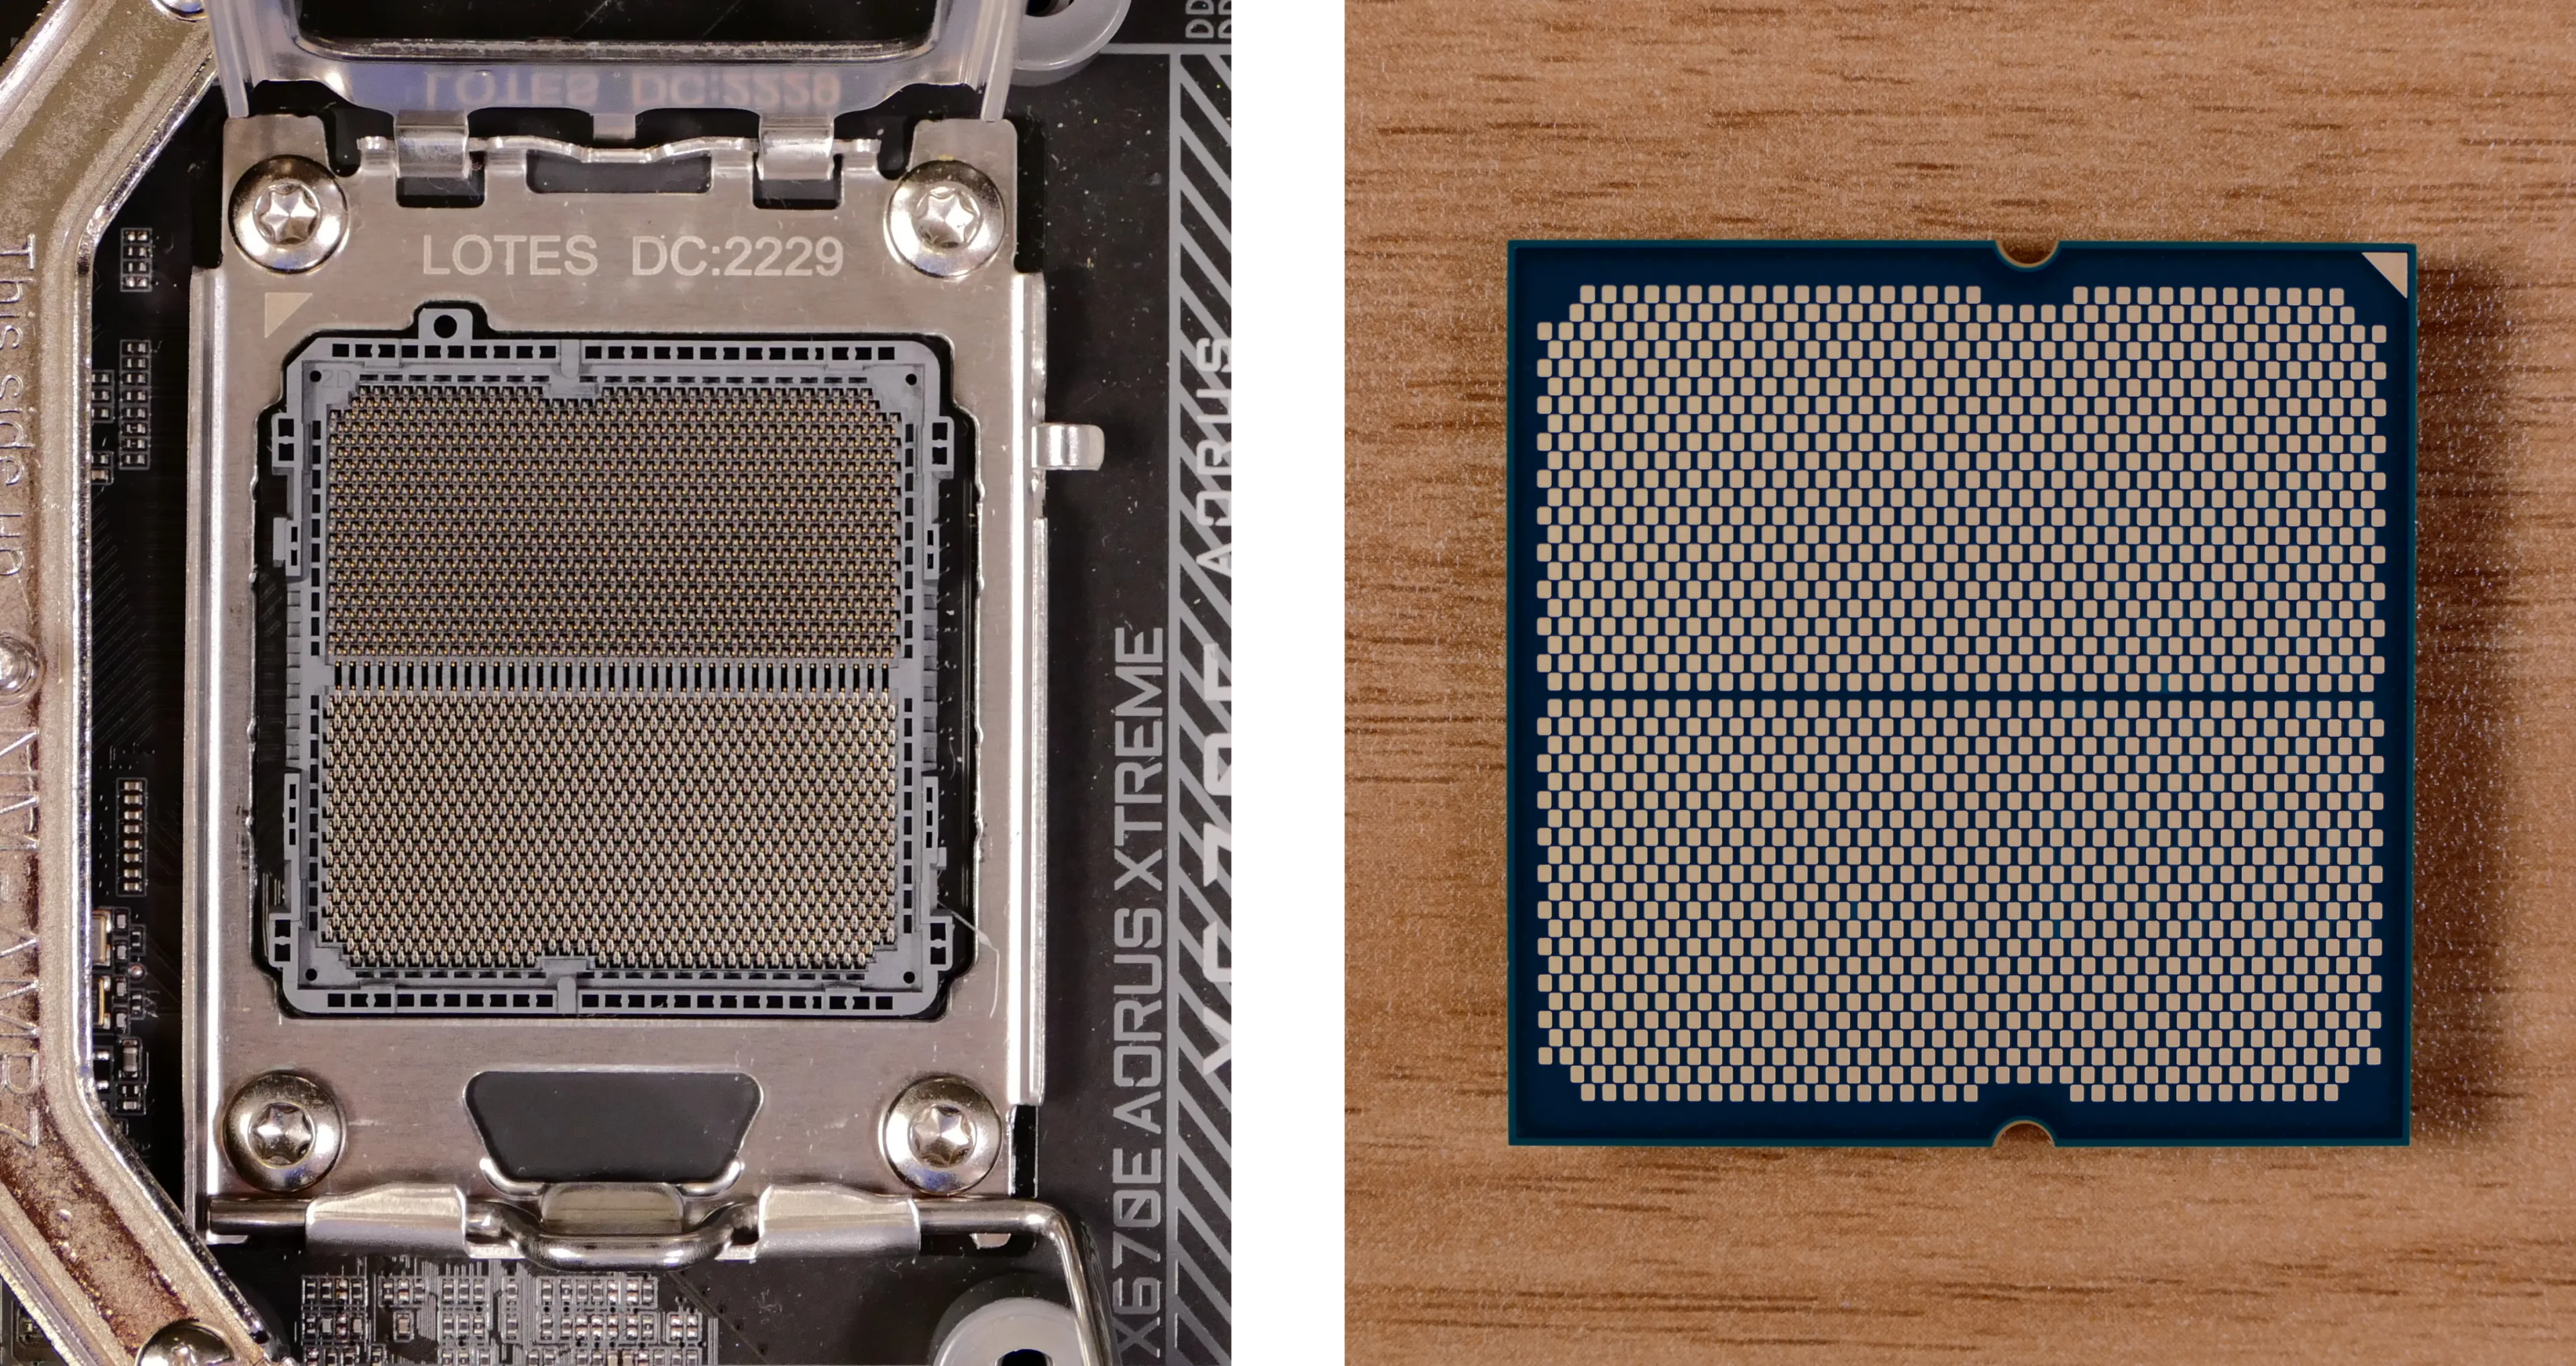 CPU (removed)